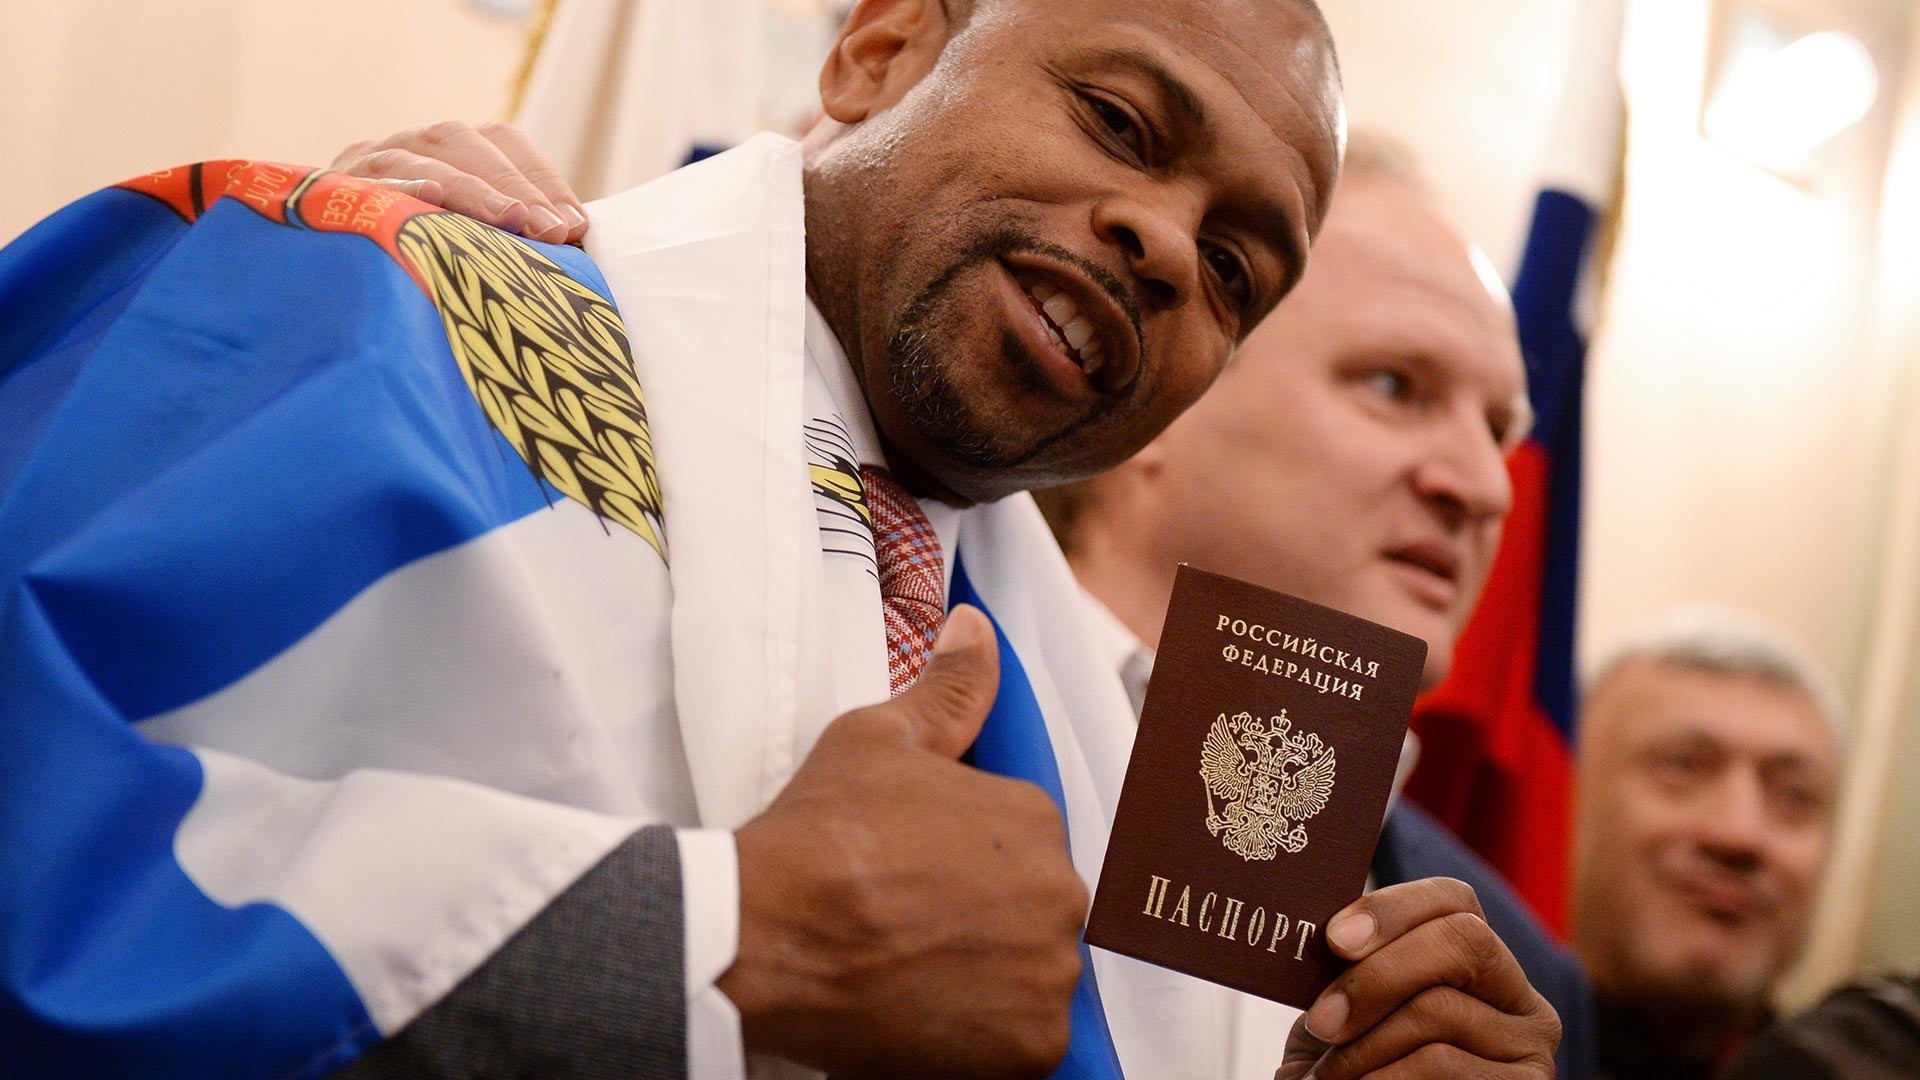 Roy Jones Jr. was one of the many foreign nationals who received a Russian passport in 2015.